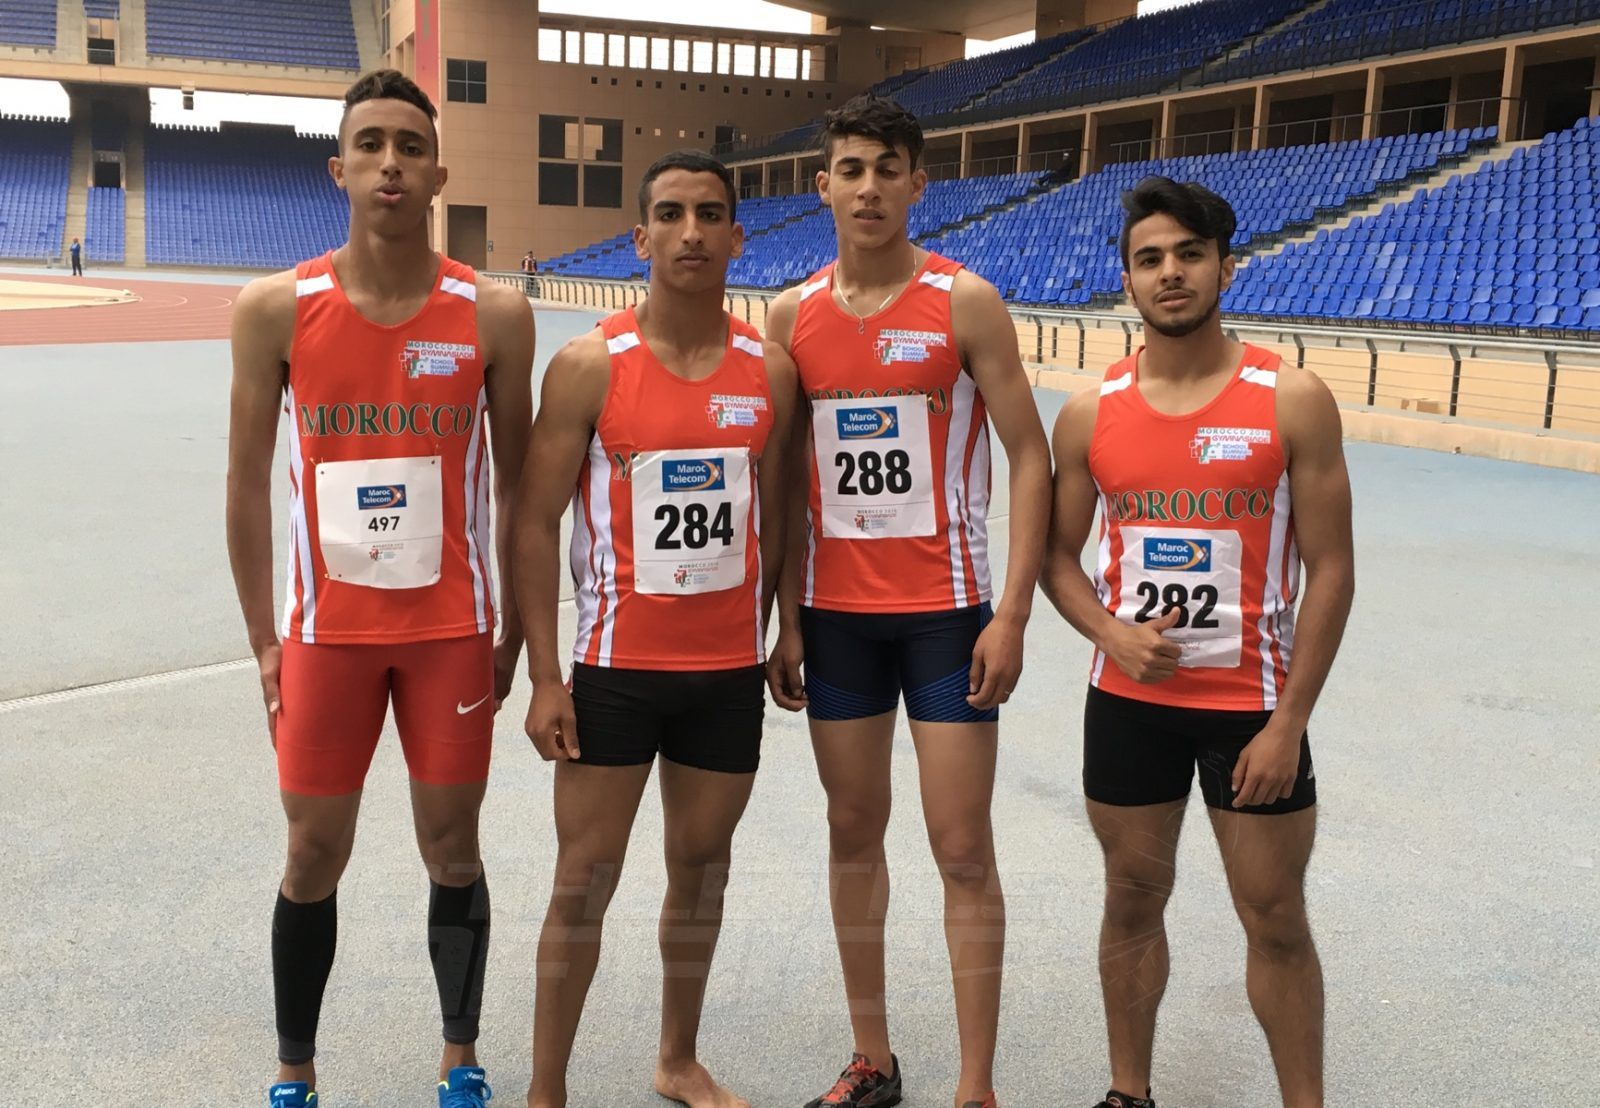 The Moroccan quartet after the Boys 4x100m final at Gymnasiade 2018 in Marrakech / Photo Credit: Yomi Omogbeja